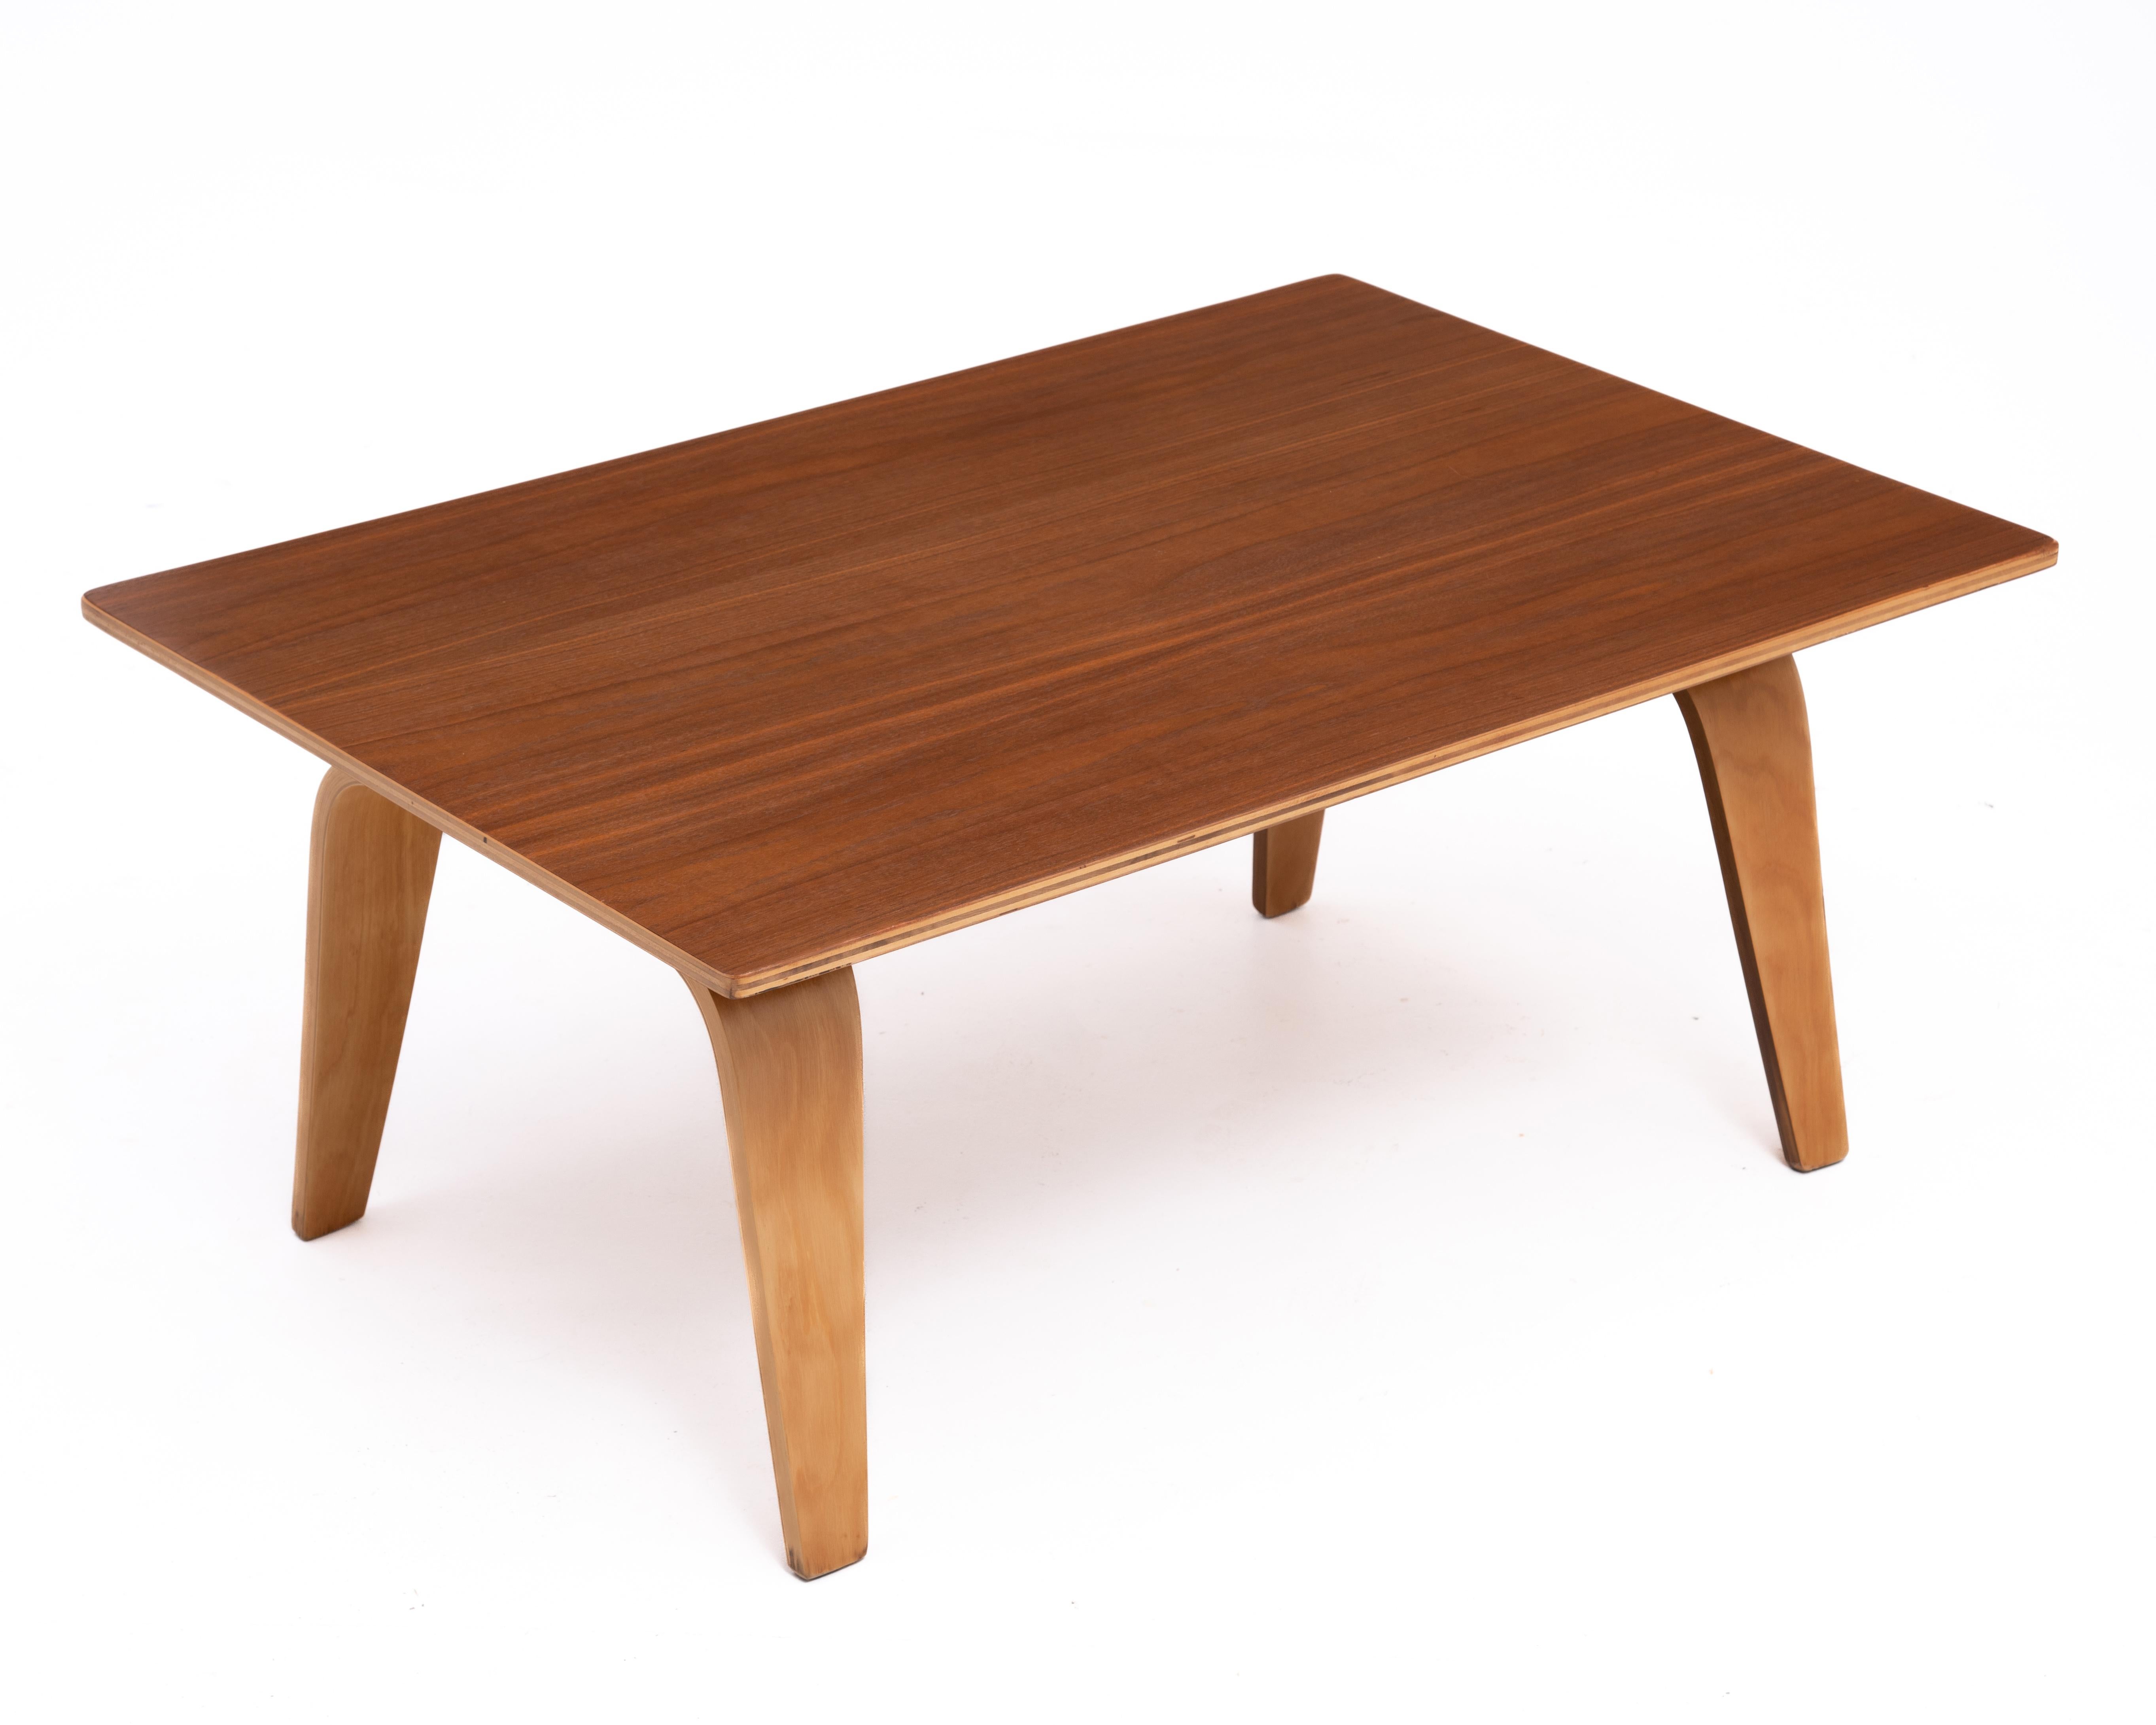 Charles Ray Eames Evans Plywood Company CTW1 OTW Oblong Table Wood Walnut Birch For Sale 3